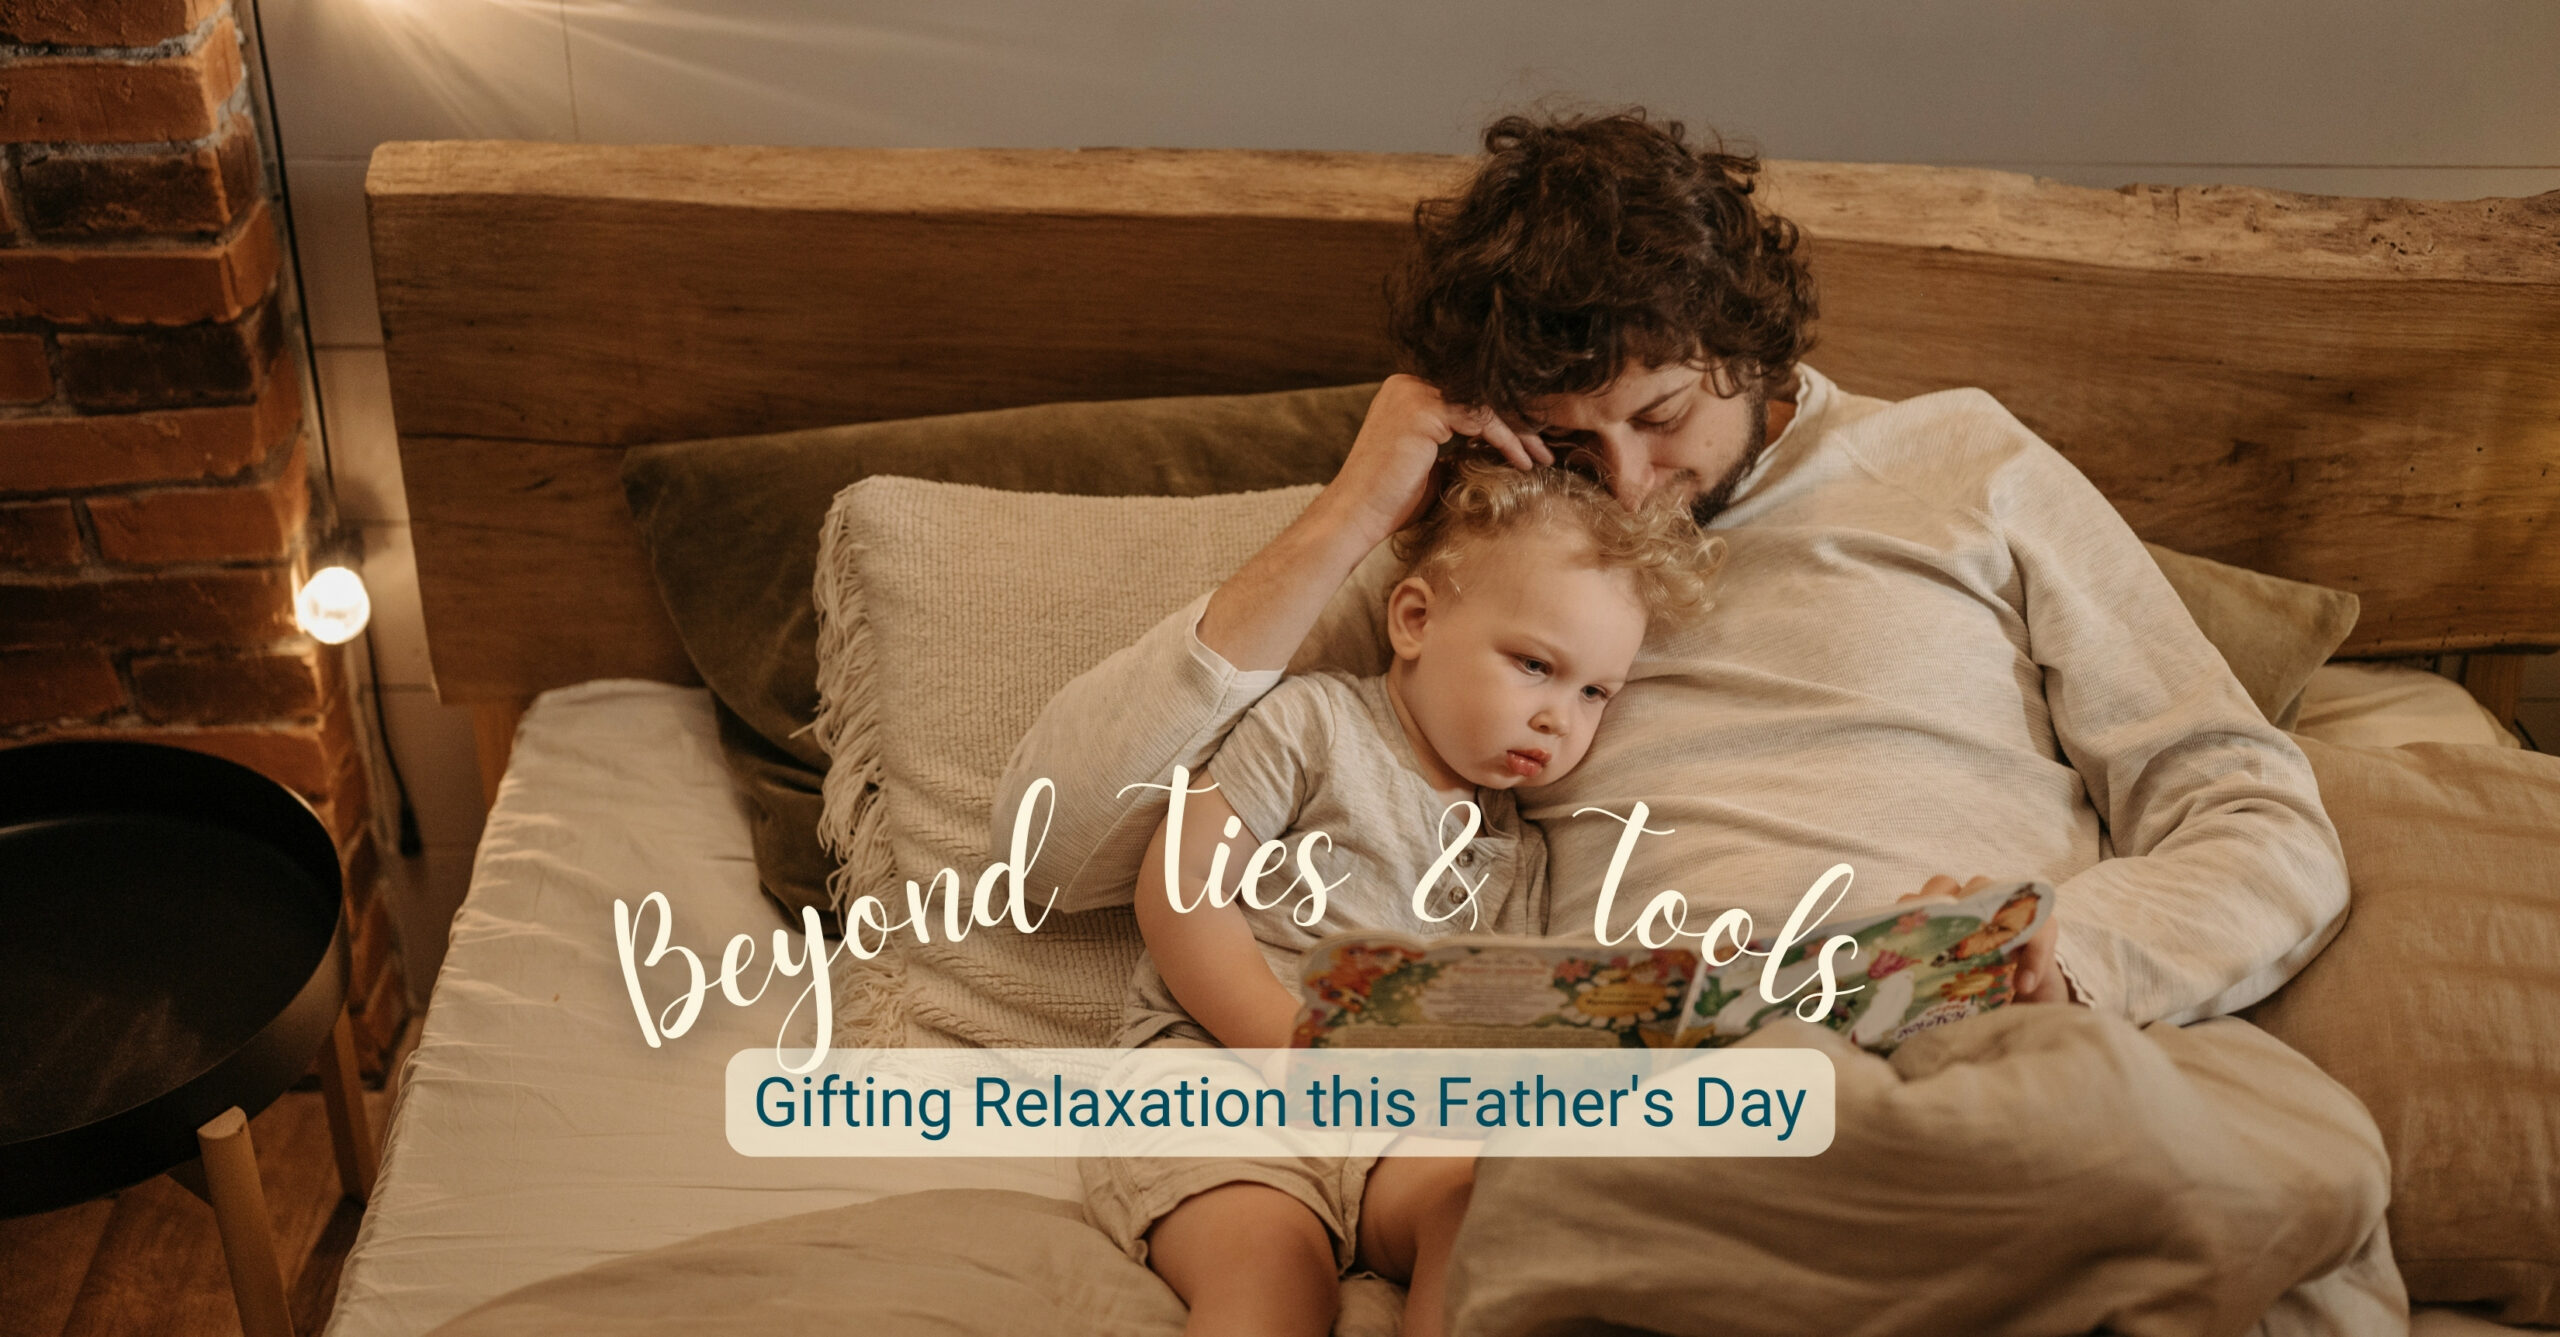 Beyond Ties & Tools: Gifting Relaxation This Father’s Day 6